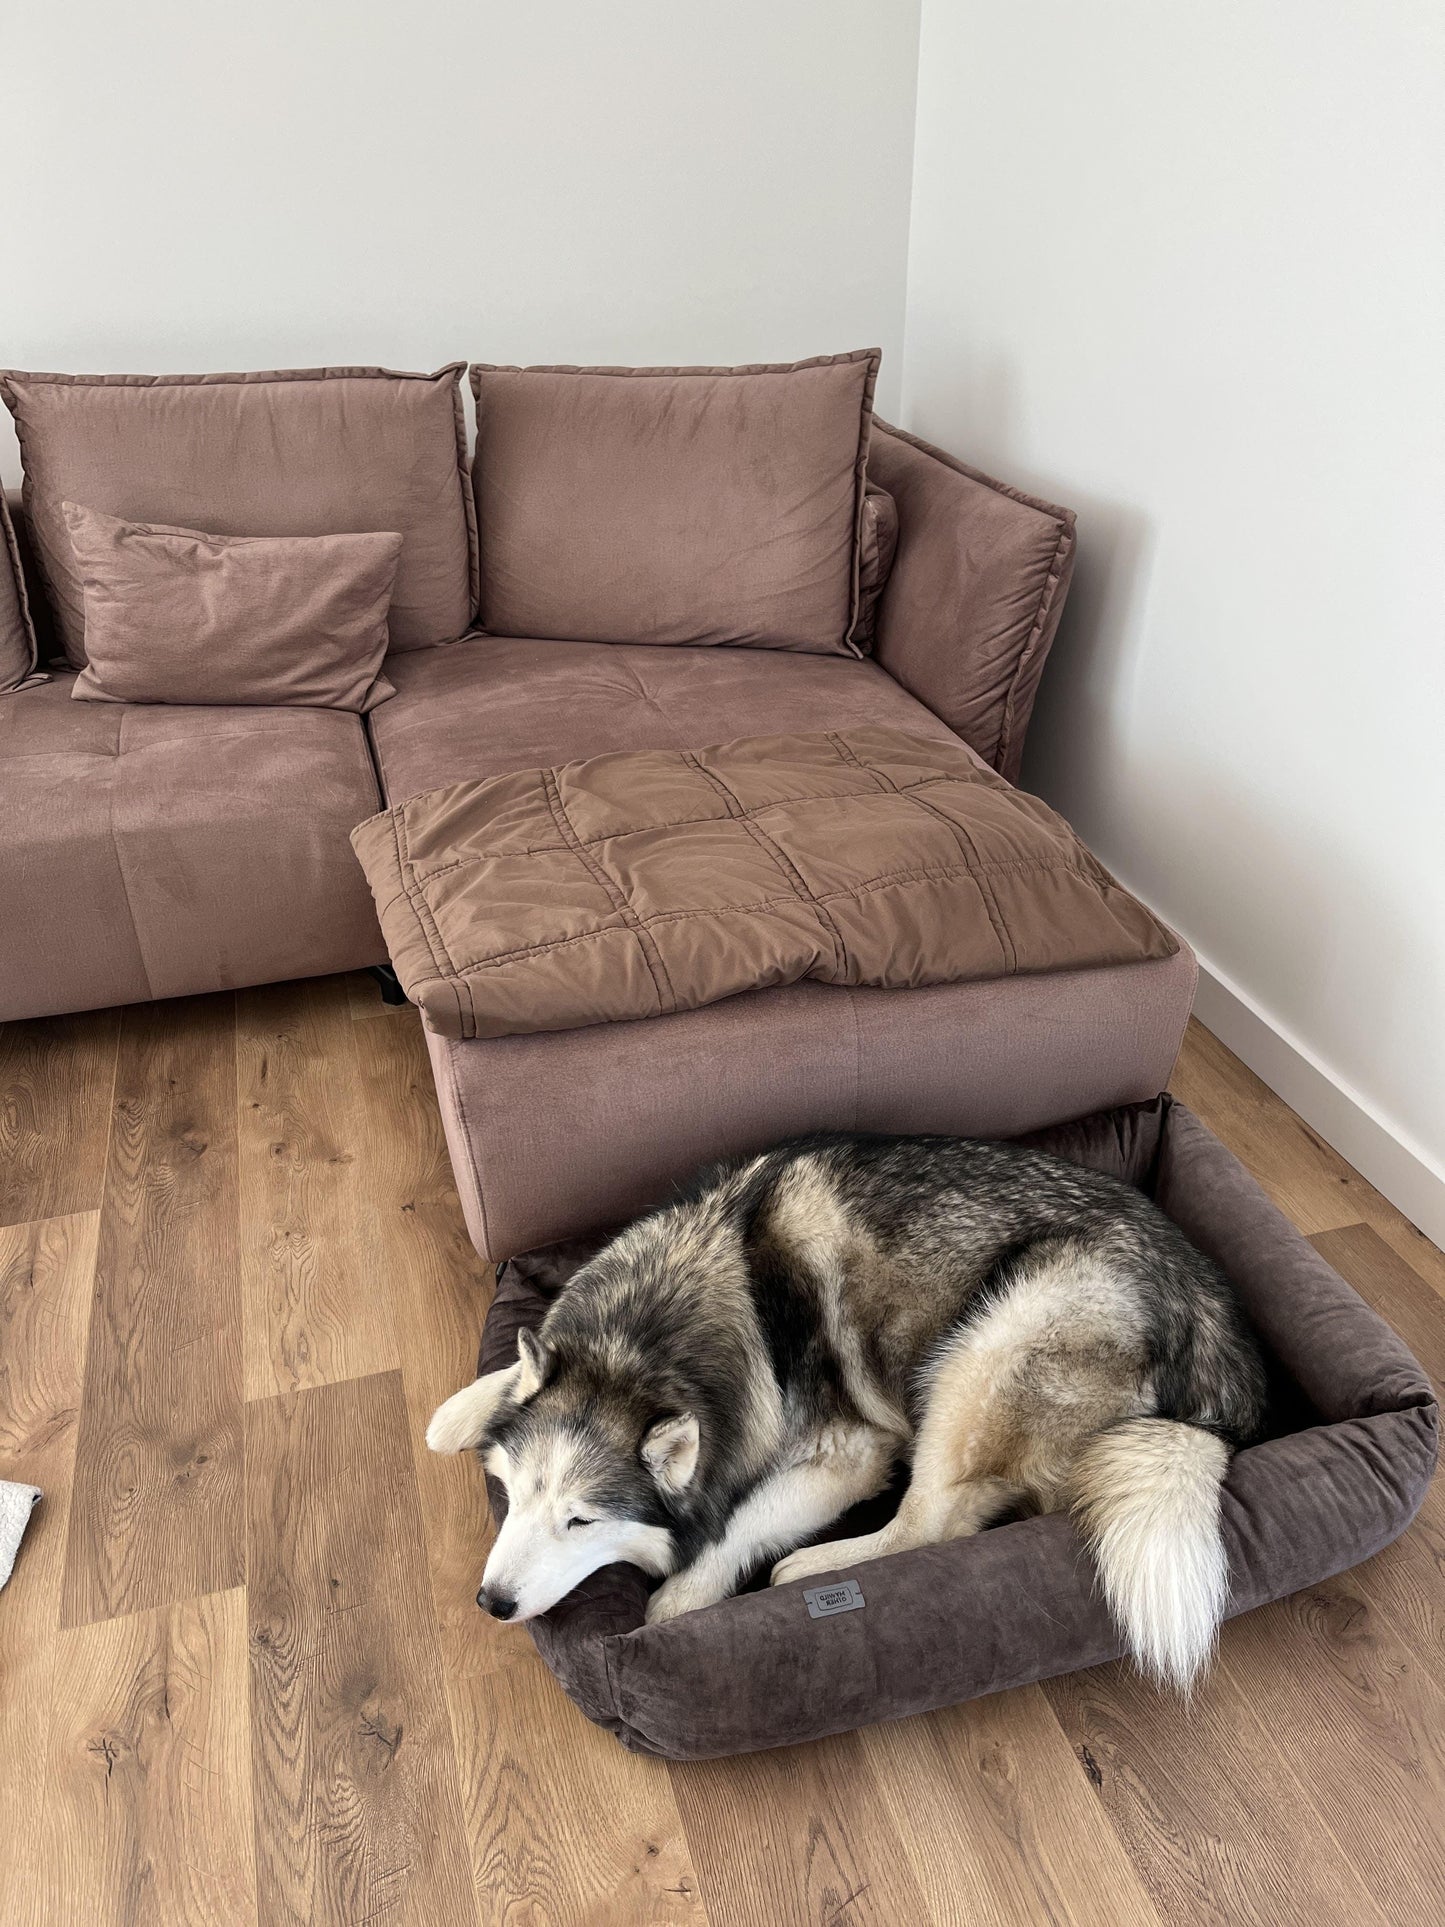 Premium dog bed with sides | 2-sided | TAUPE - premium dog goods handmade in Europe by My Wild Other